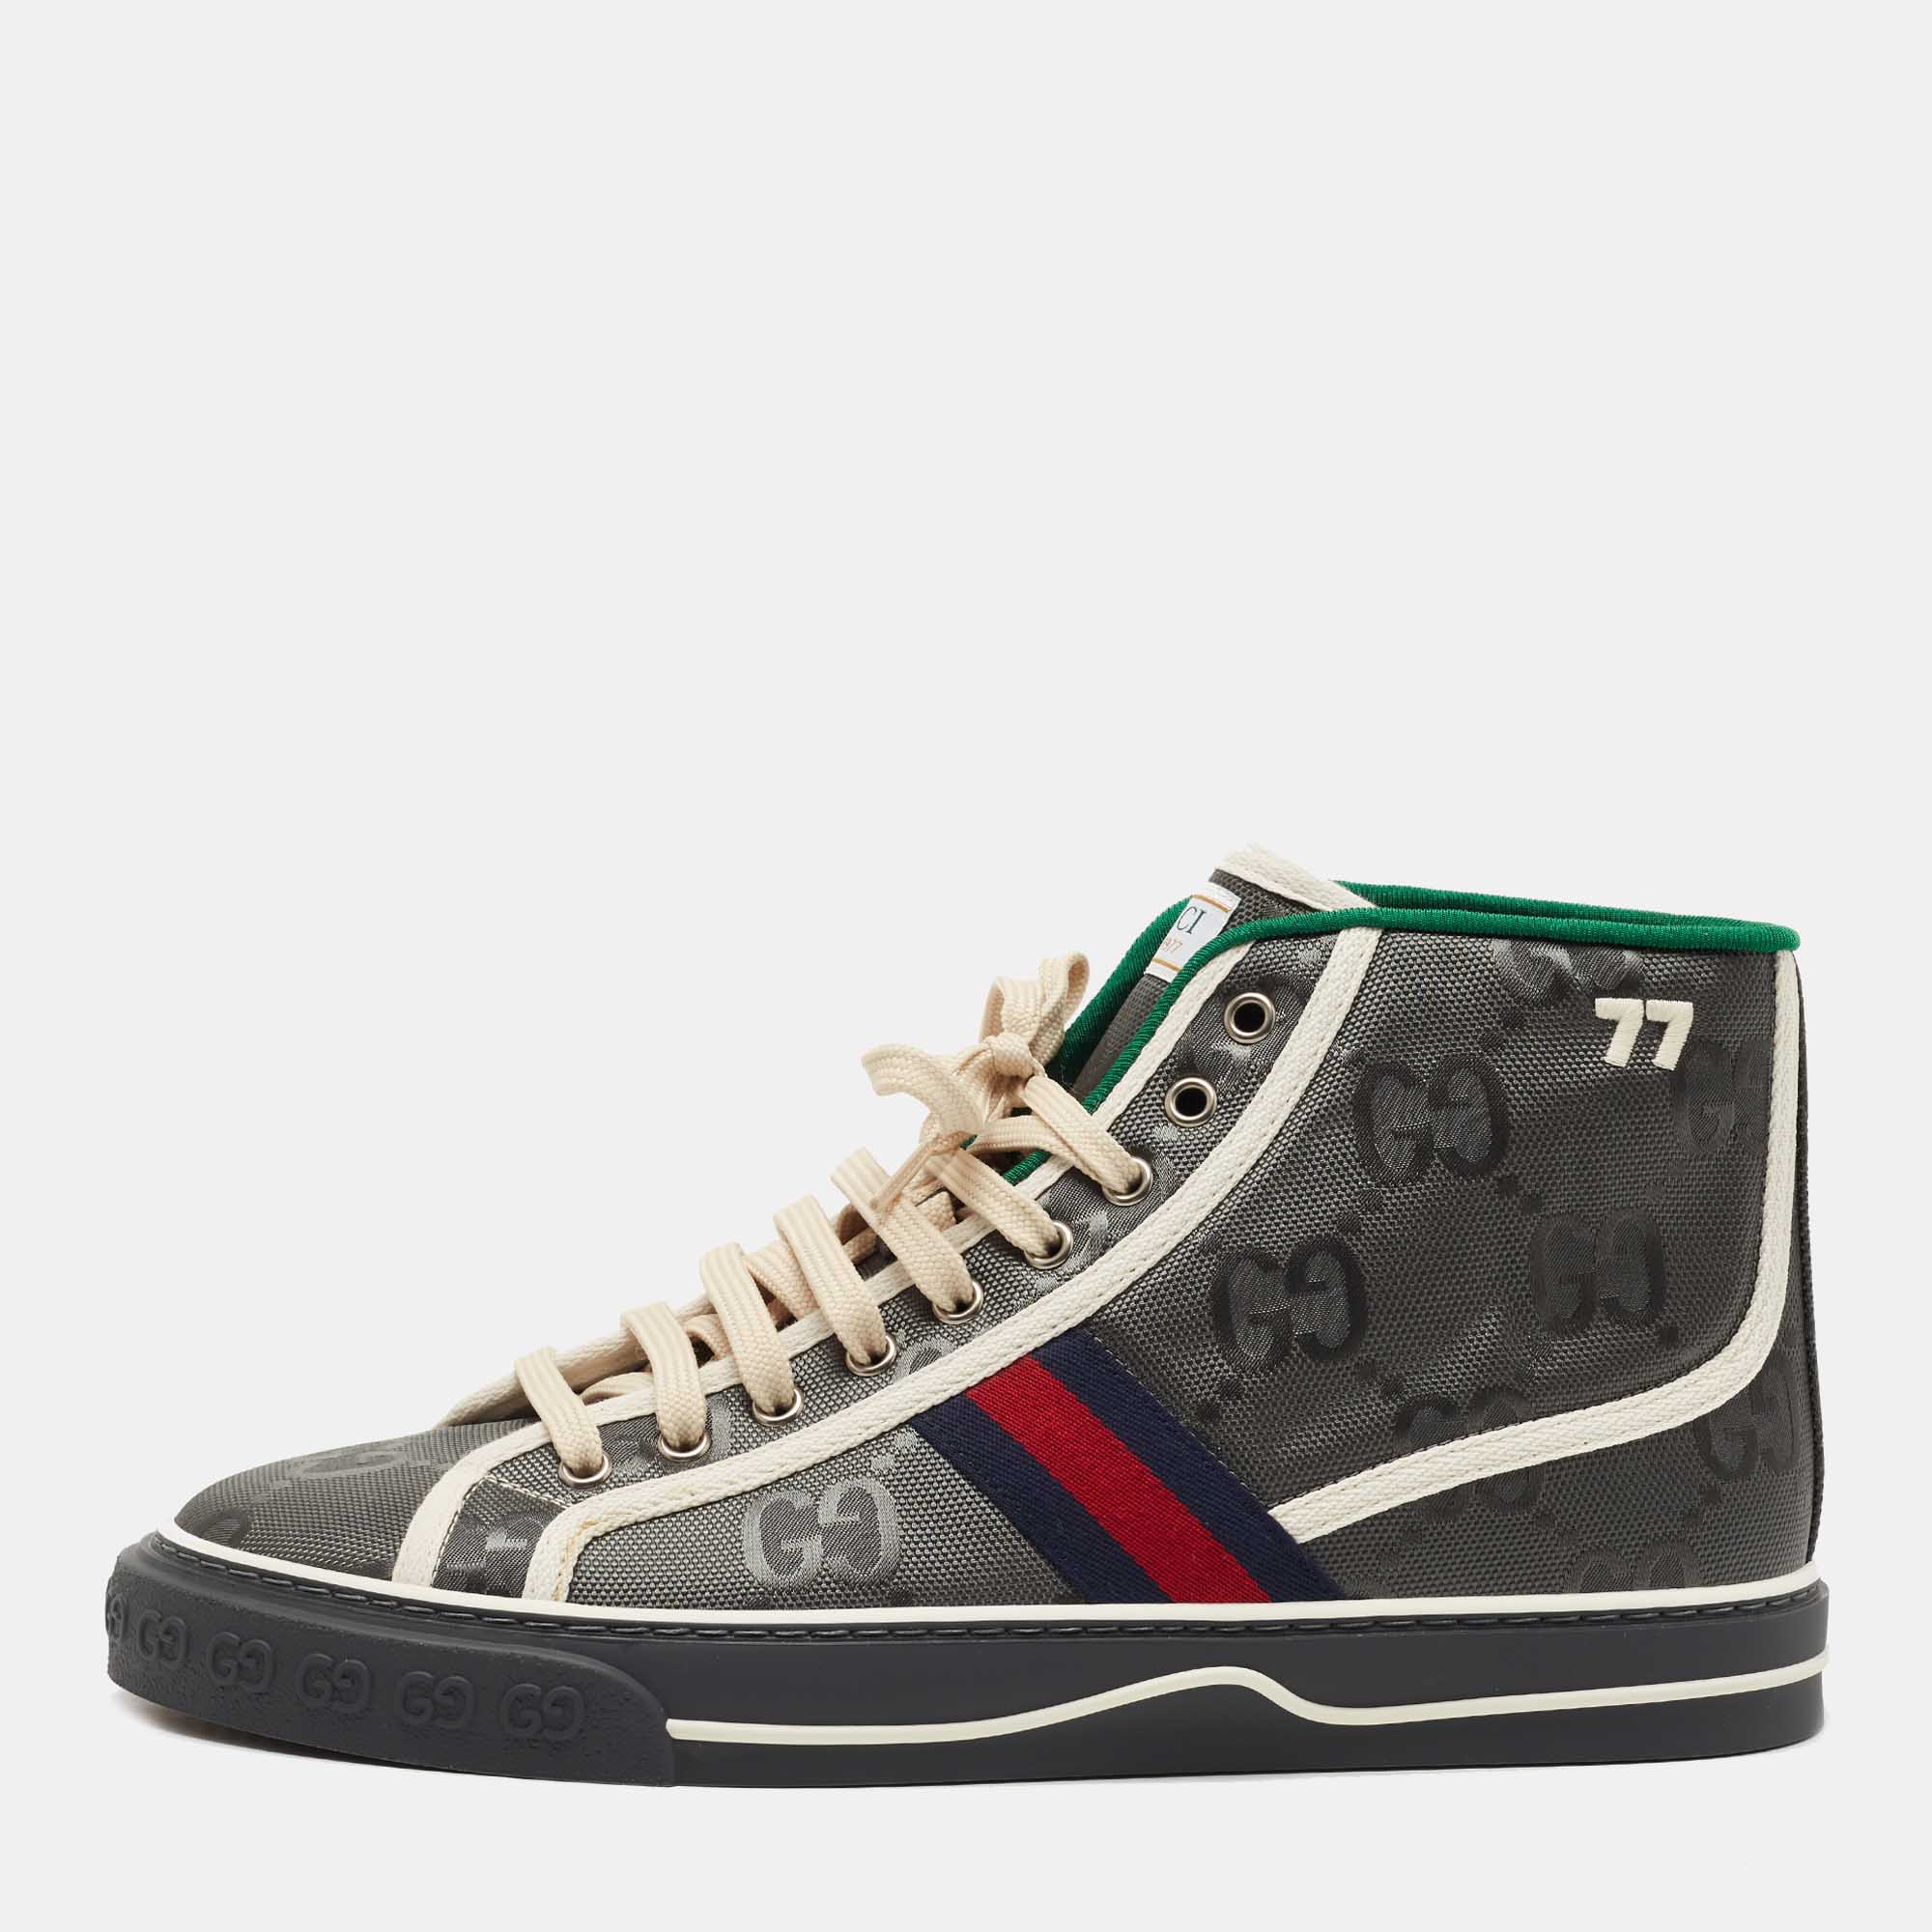 Pre-owned Gucci Grey Nylon Tennis 1977 High Top Sneakers Size 43